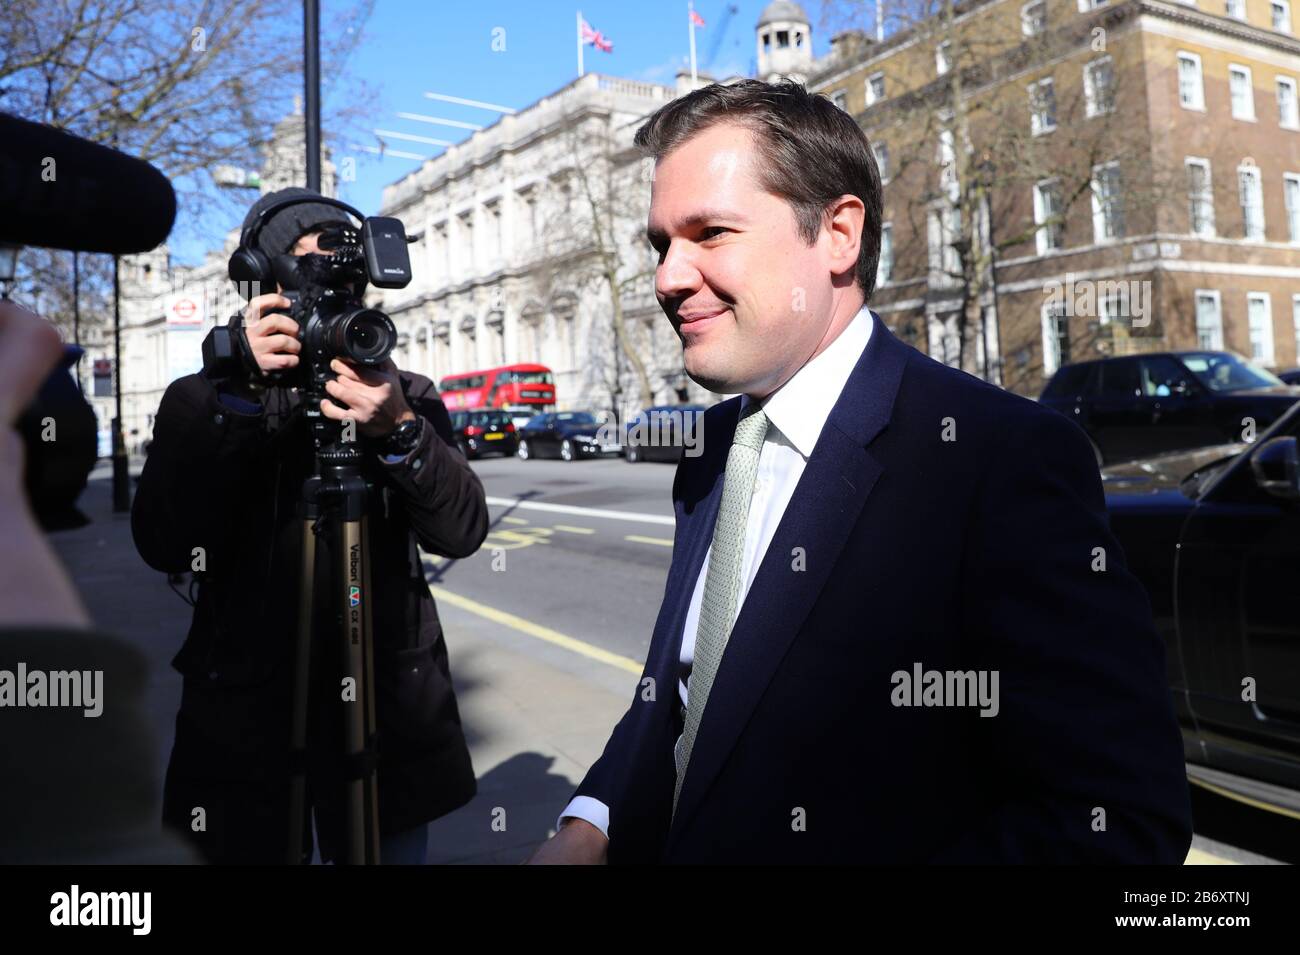 Housing Secretary Robert Jenrick arrives at the Cabinet Office, London, ahead of a meeting of the Government's emergency committee Cobra to discuss coronavirus. Stock Photo